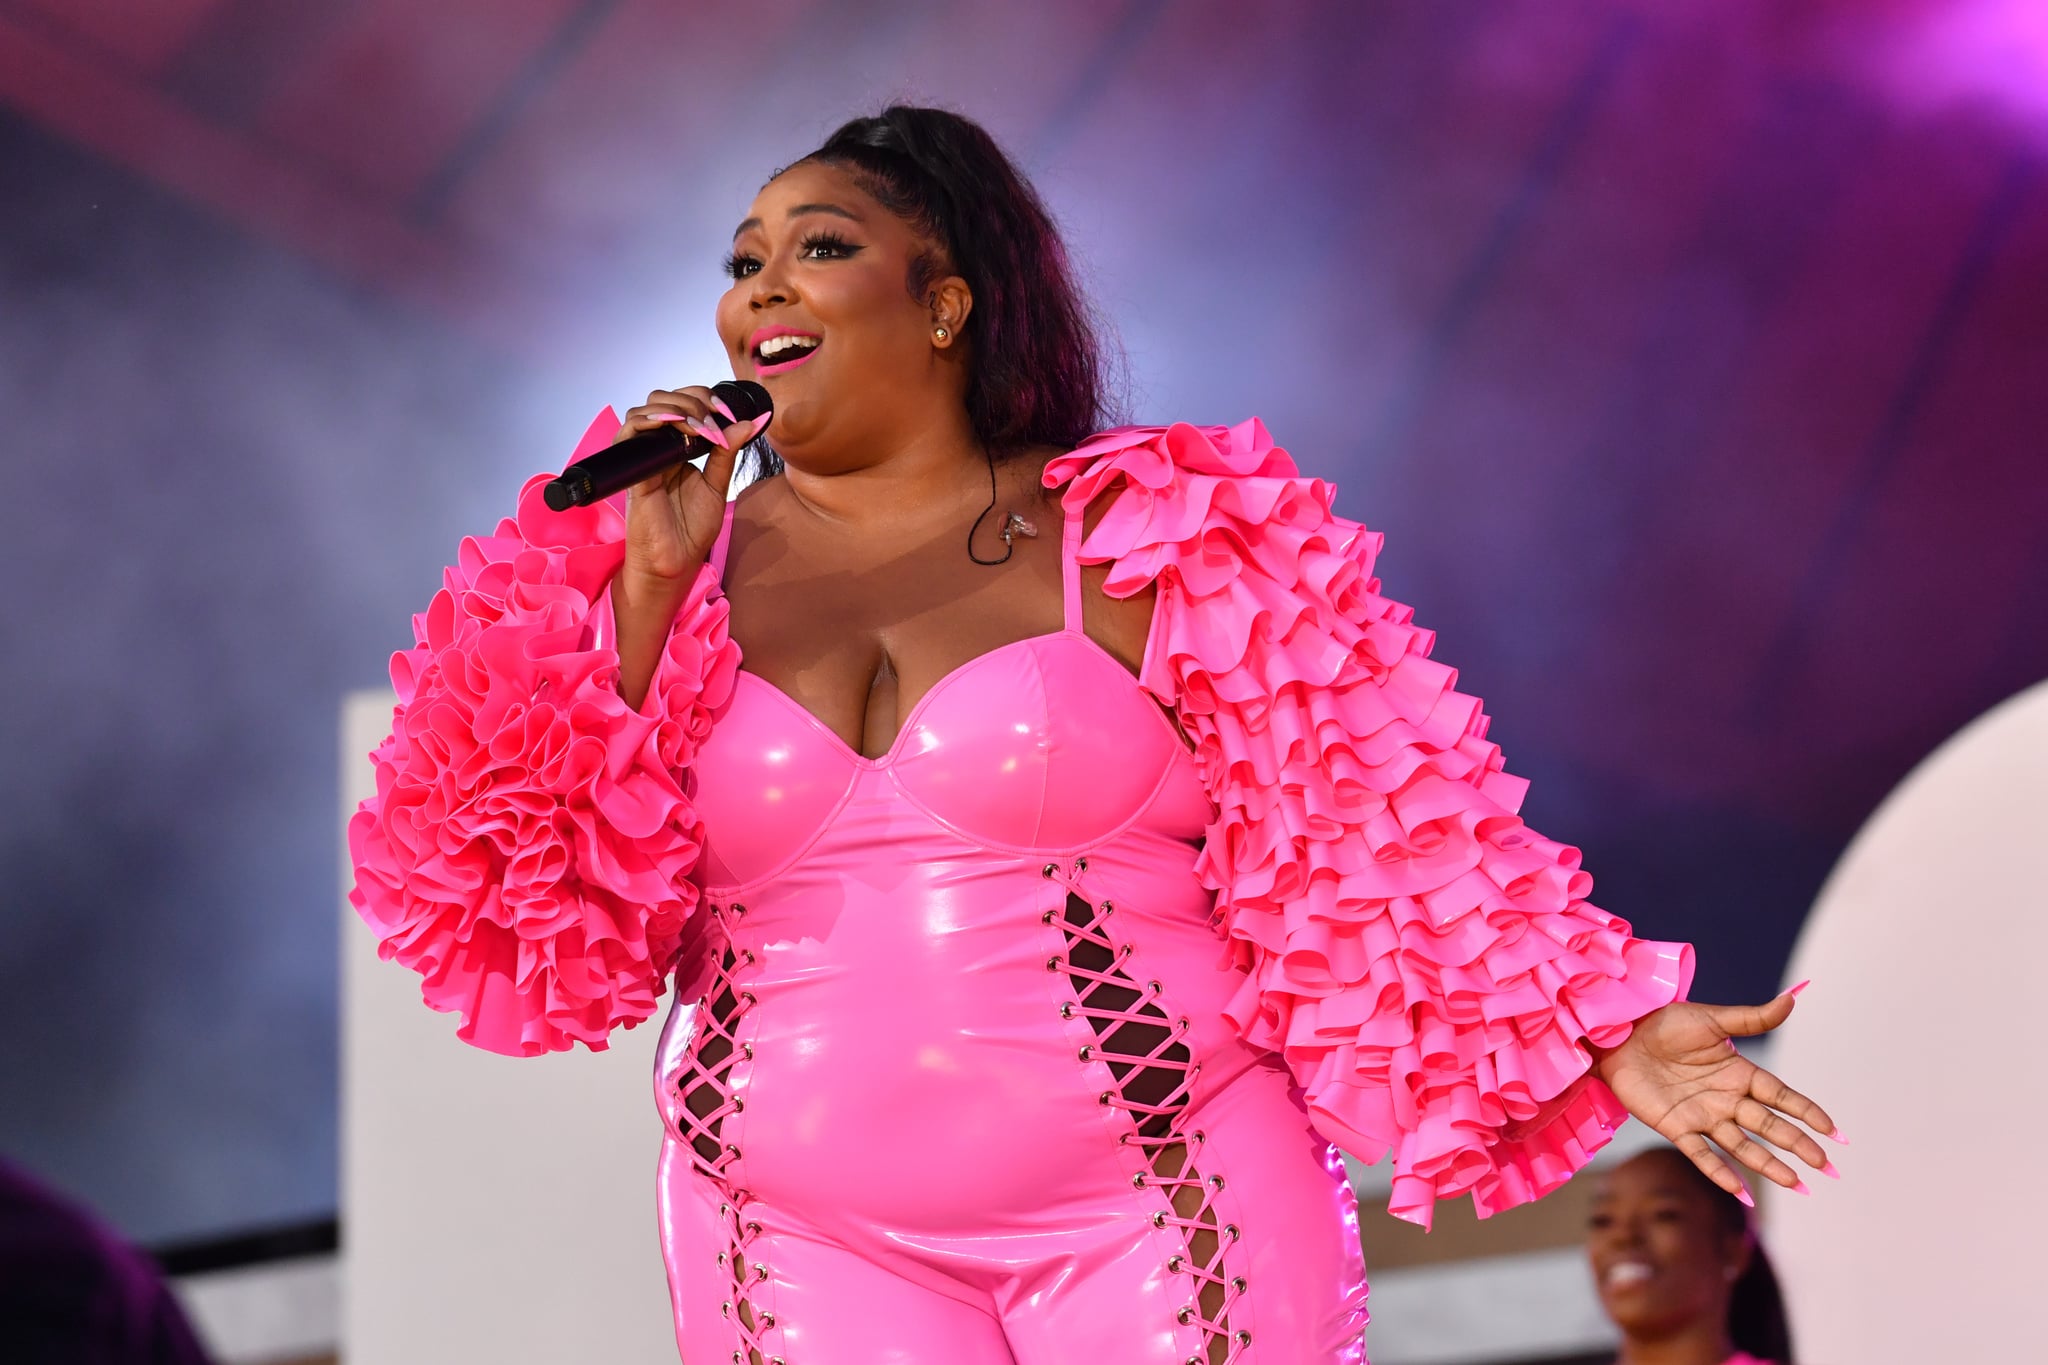 Lizzo Explains Her Decision to Change “Grrrls” Lyric: “Using a Slur Is Unauthentic to Me”